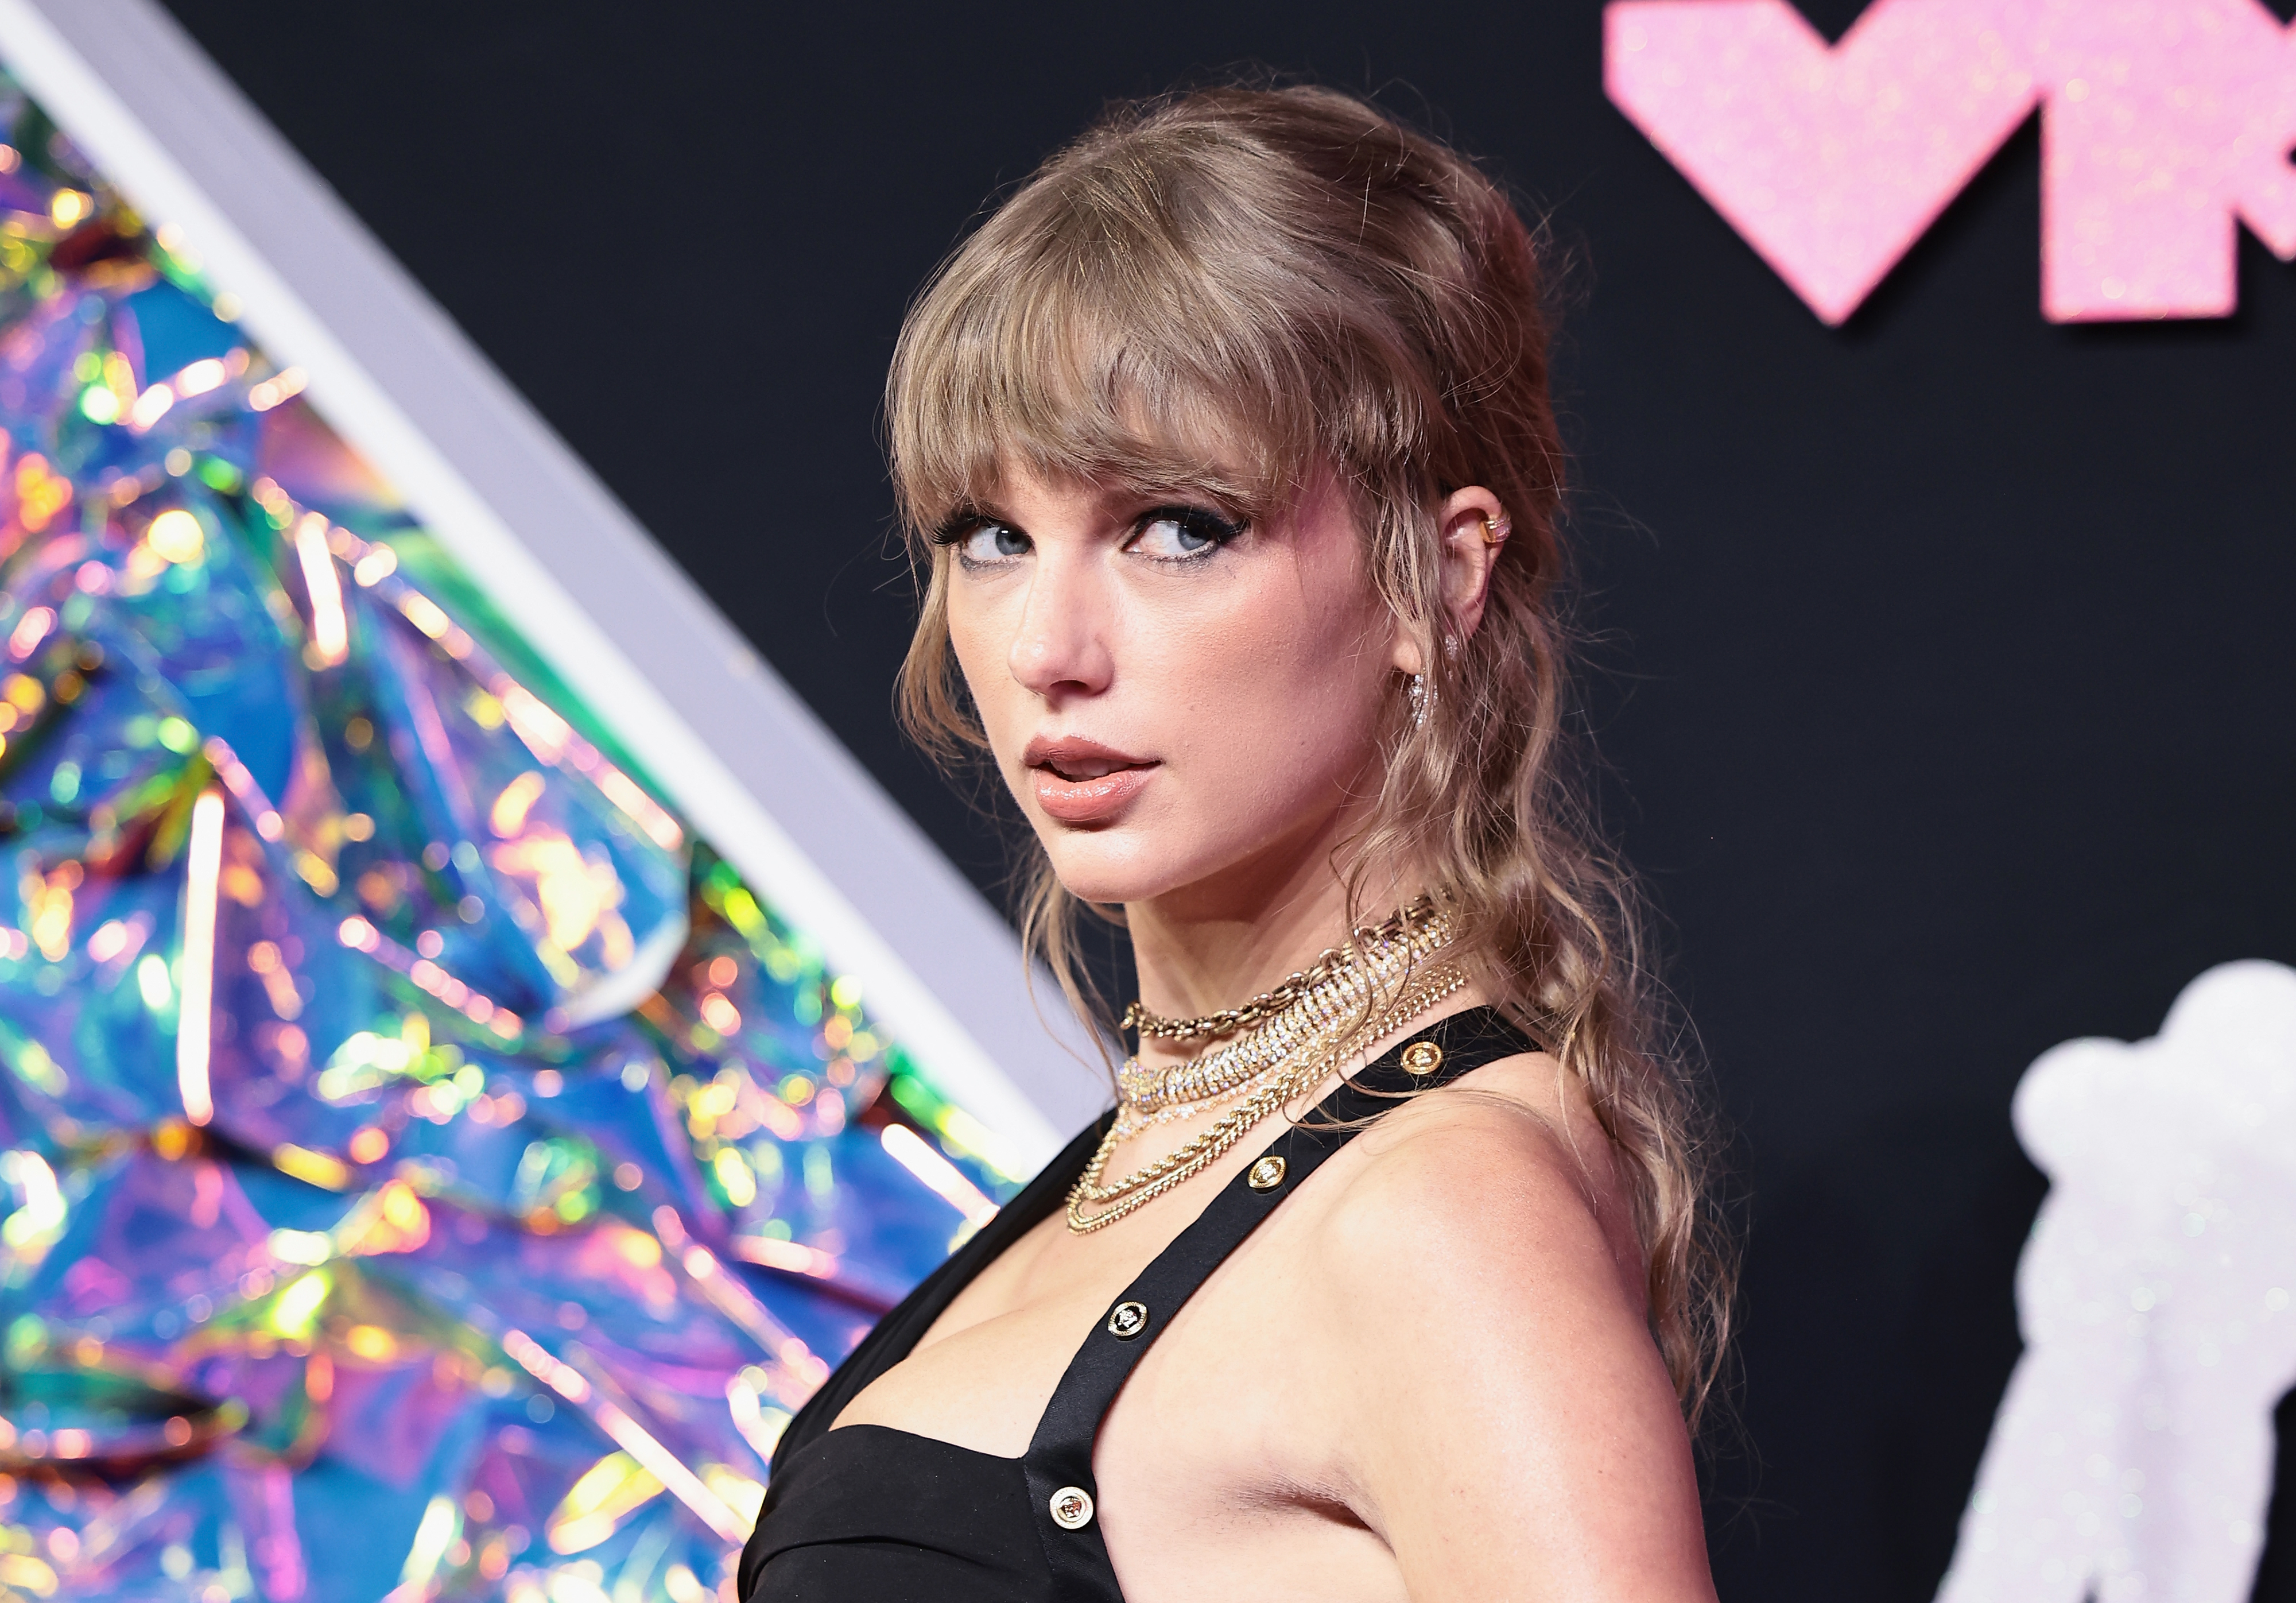 Taylor Swift poses at an event wearing a black outfit with gold accessories